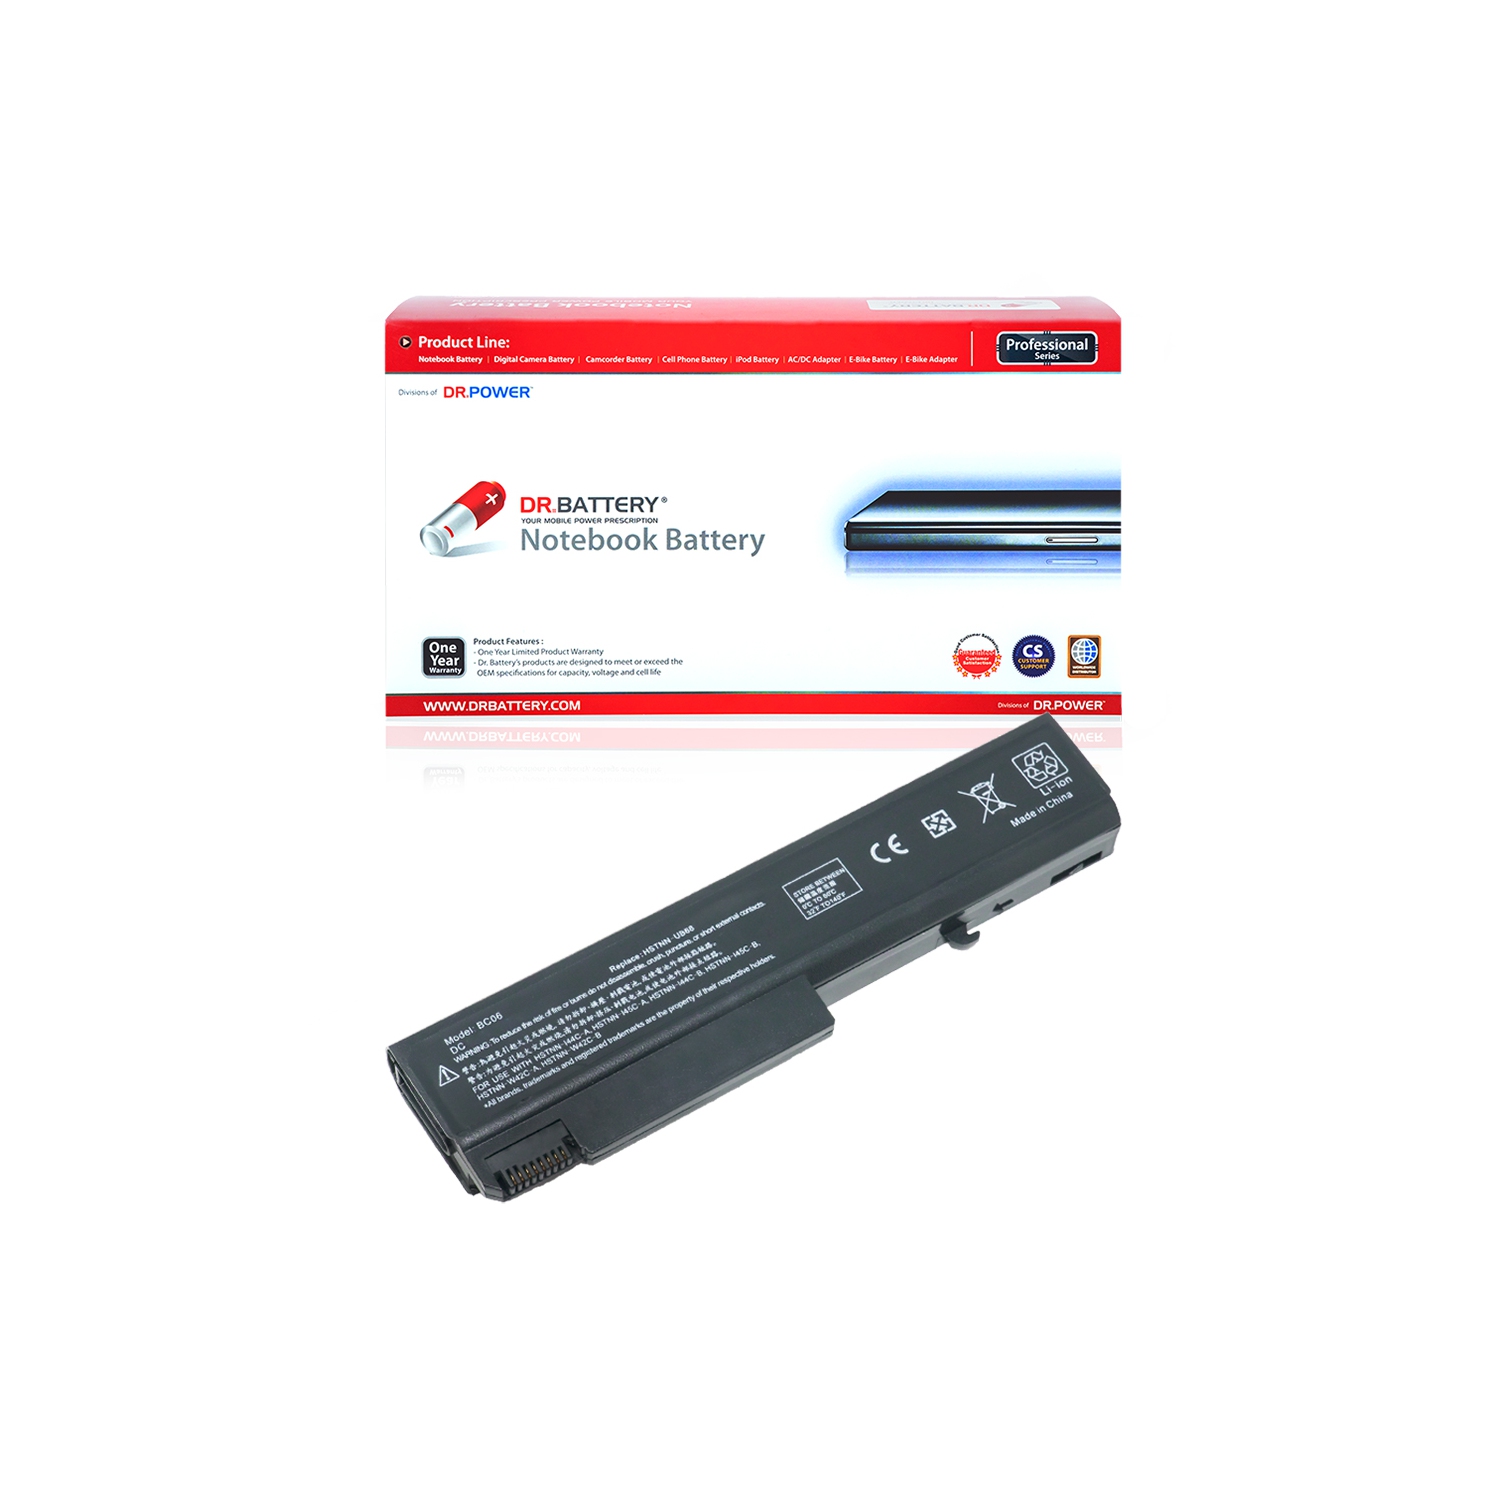 DR. BATTERY - Replacement Laptop Battery for HP EliteBook 6930p / 8440p / 8440w Mobile / HSTNN-UB85 / HSTNN-W42C / HSTNN-W42C-A [10.8V / 48Wh] ***Free Shipping***